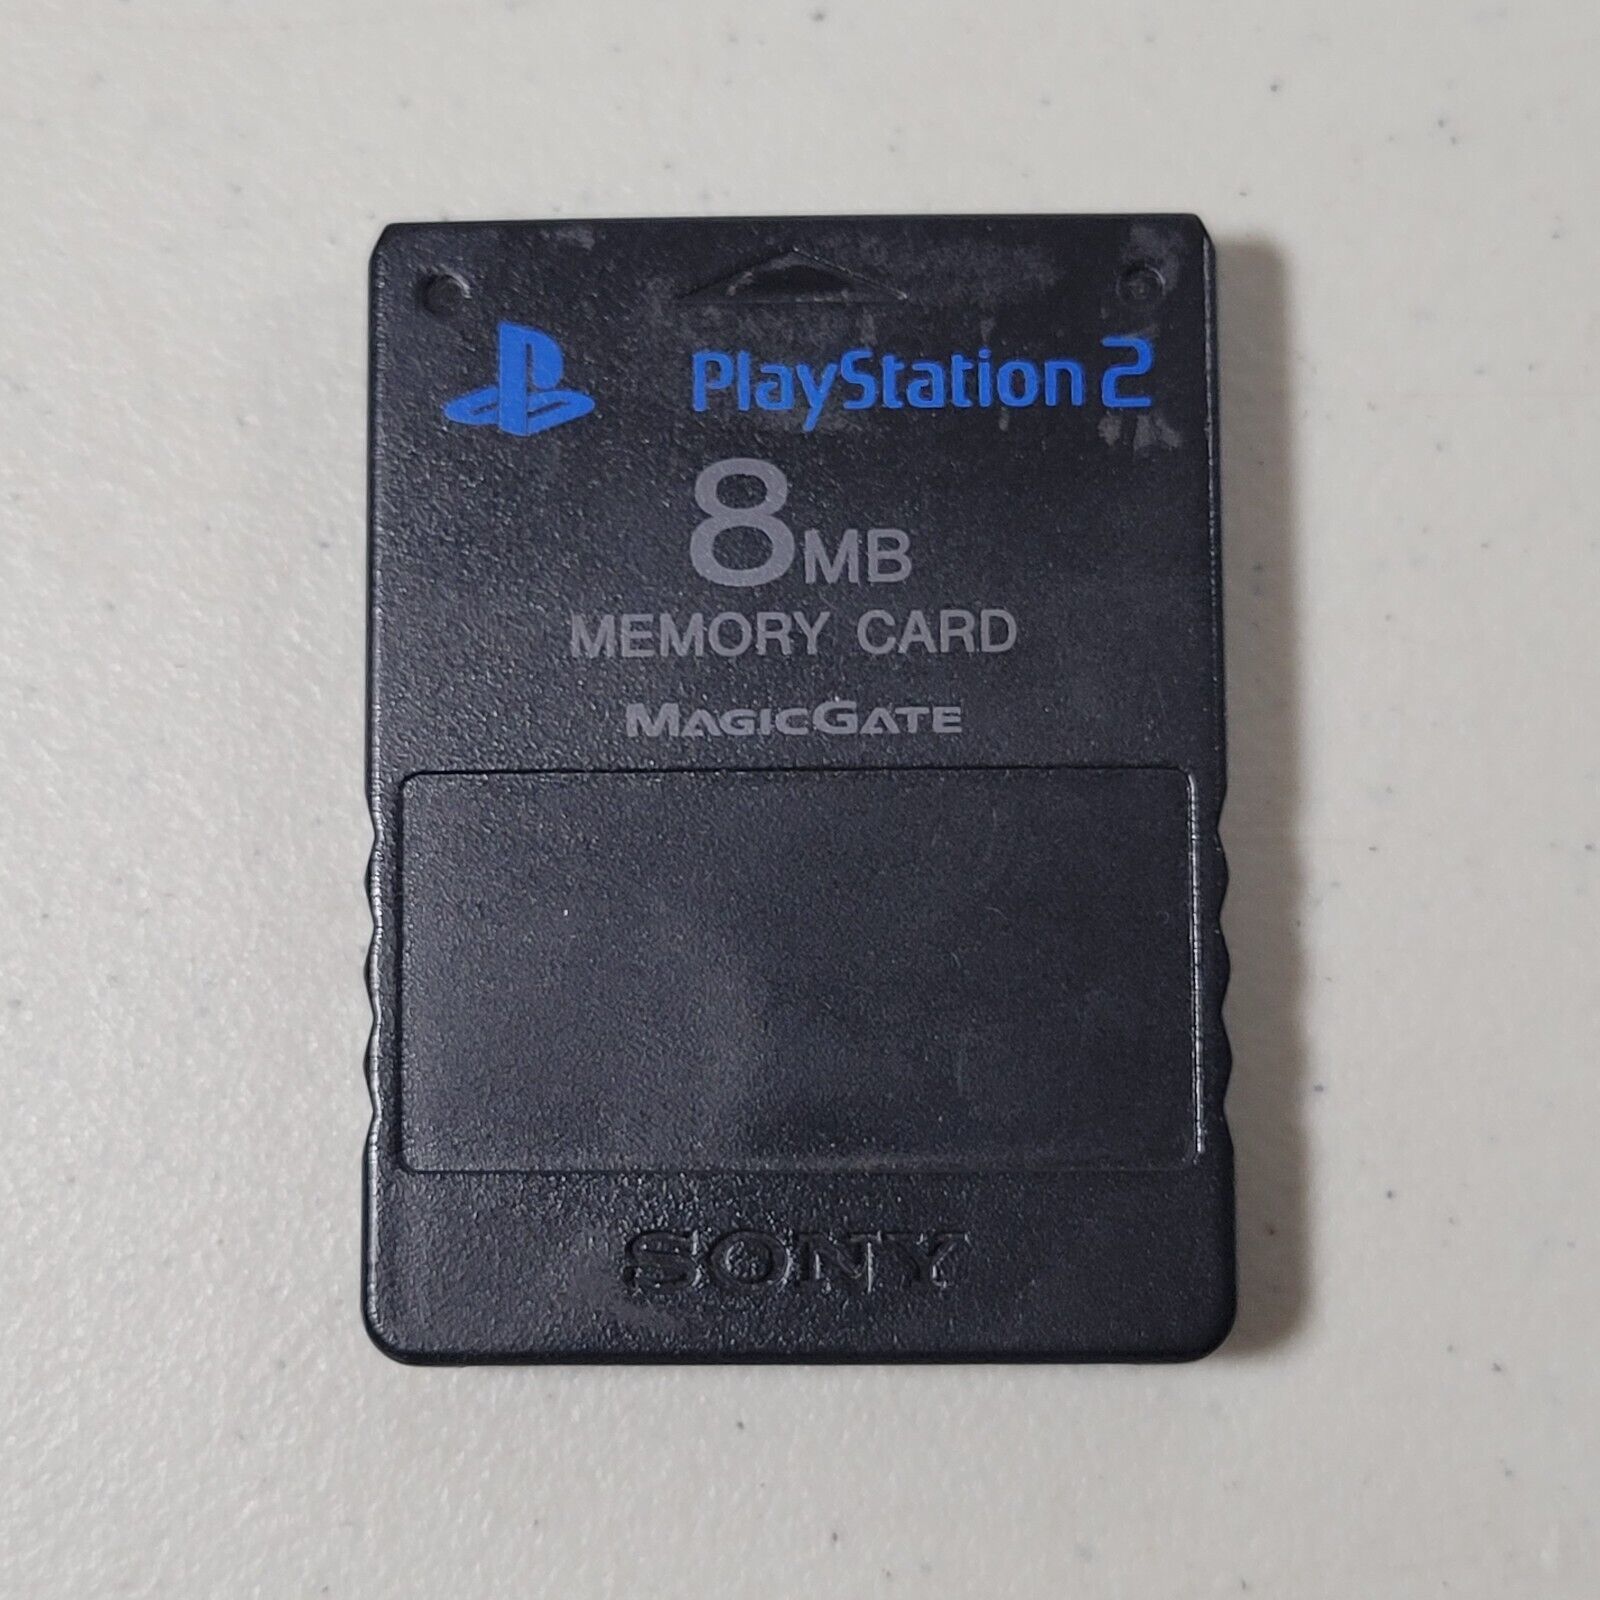 Official OEM Sony Playstation 2 PS2 8MB Magicgate Memory Card SCPH-10020 Black - $8.98